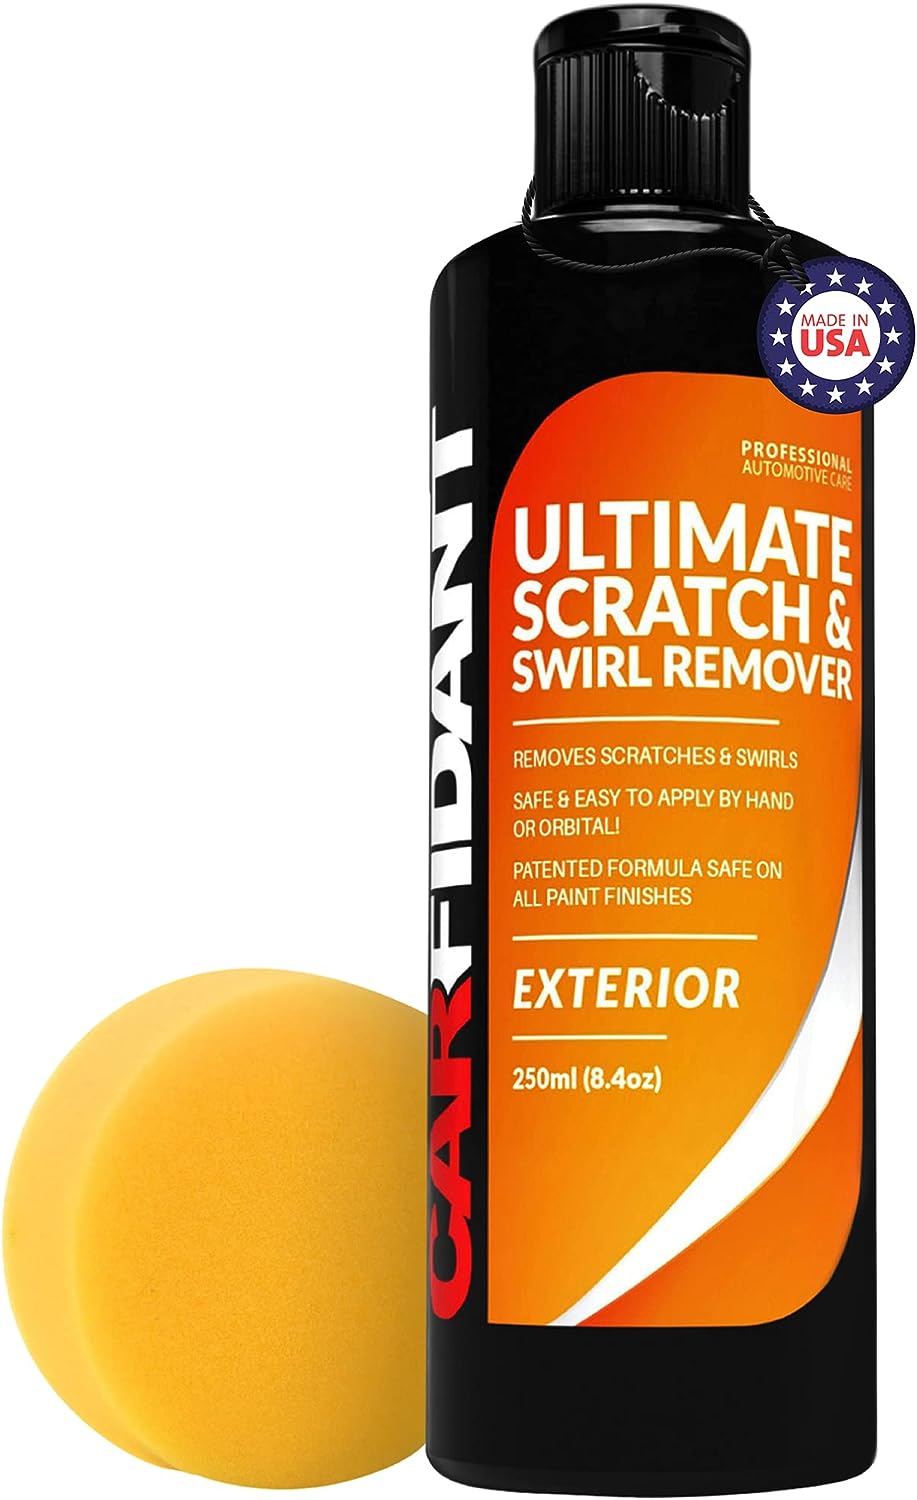 Best Solution for Car Scratches: Top 5 Products Revealed